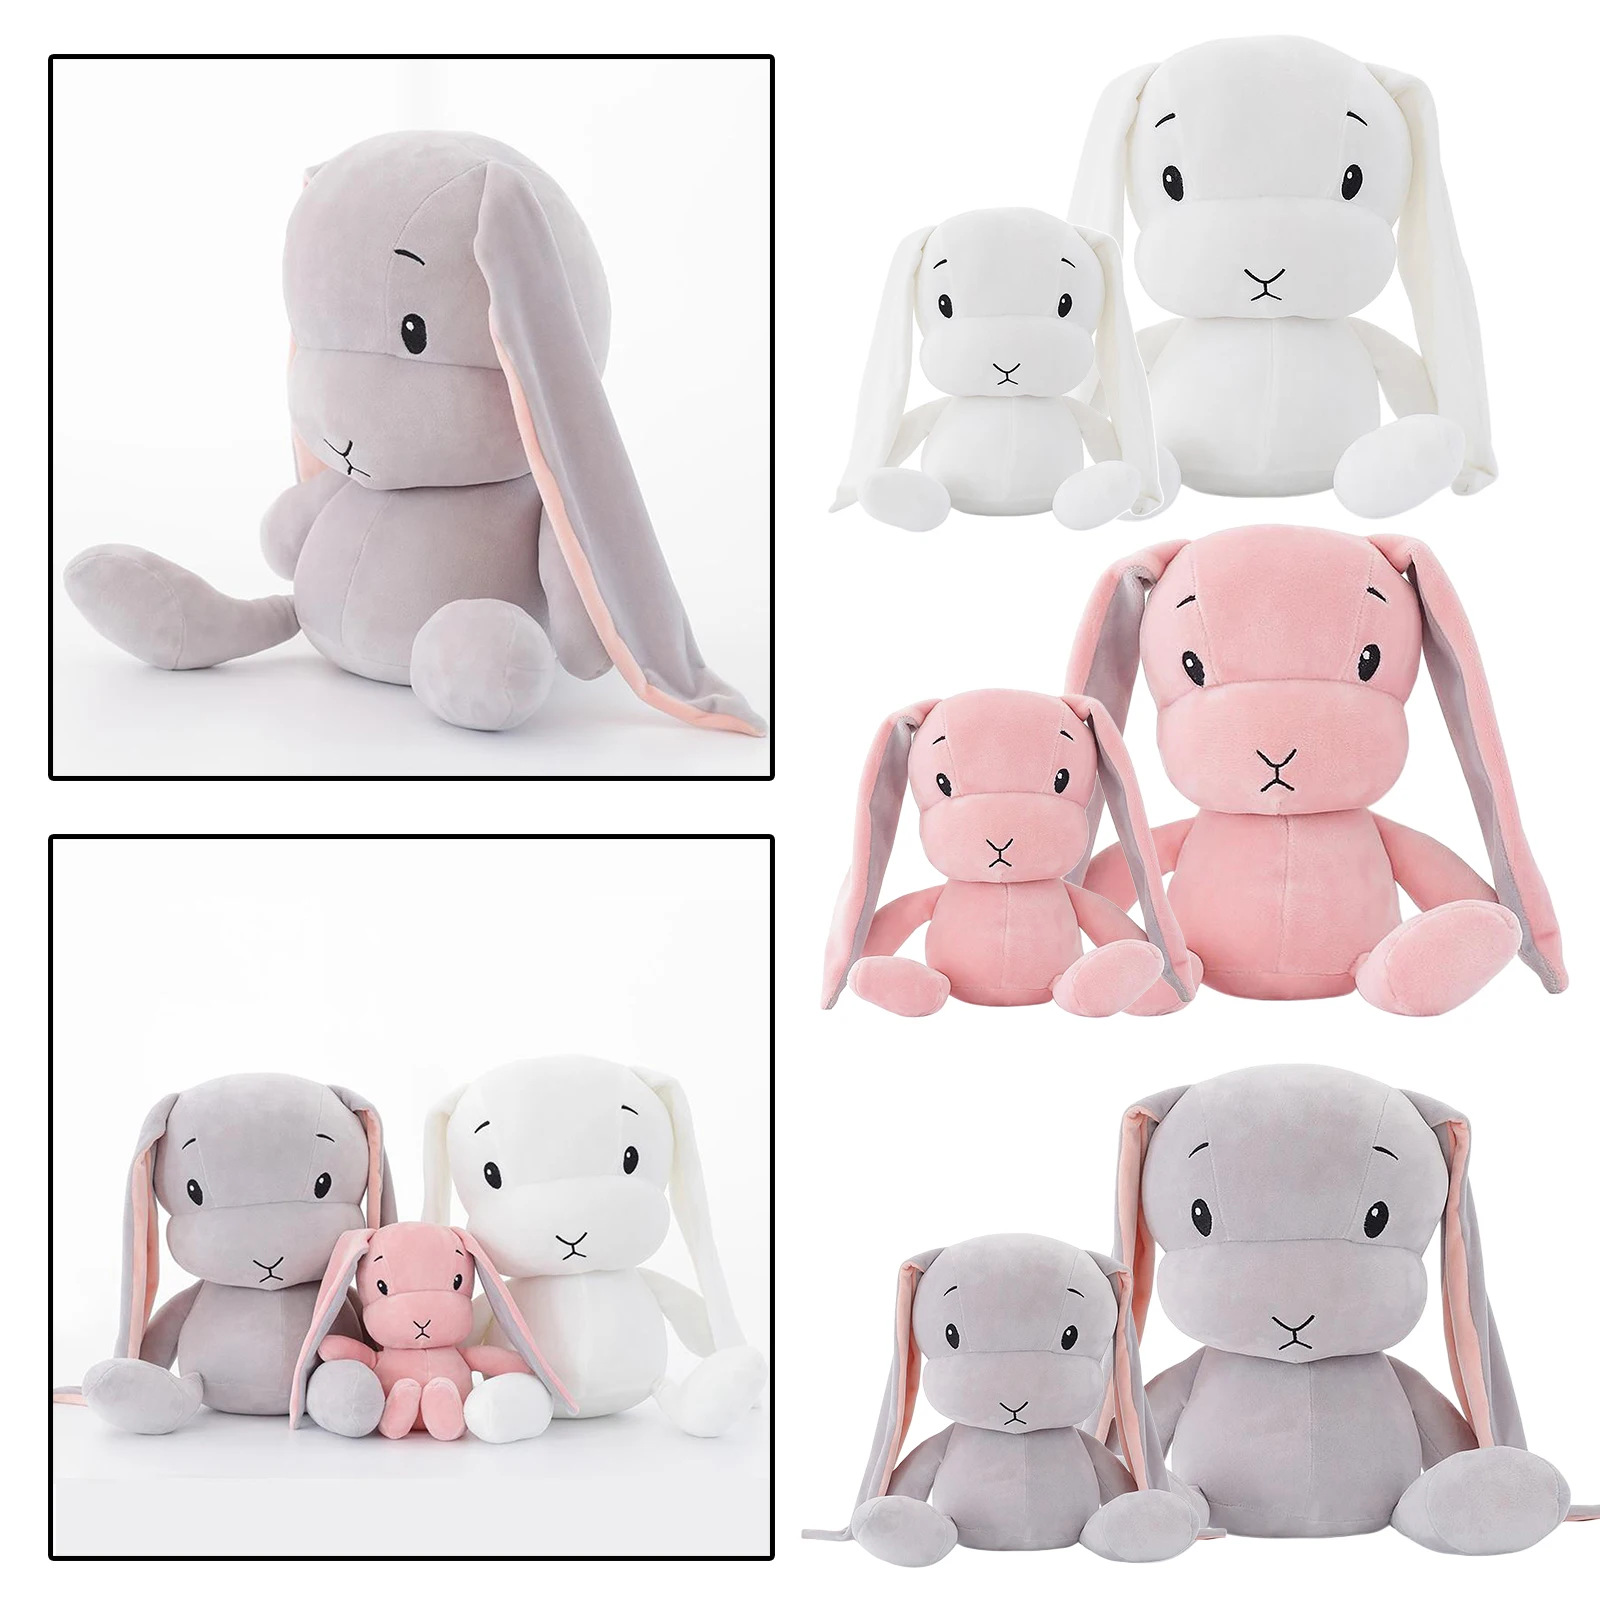 

Adorable Rabbit Plush Toy Cotton Stuffed Cartoon Long Ears Bunny Hugging Toy for Friends Families